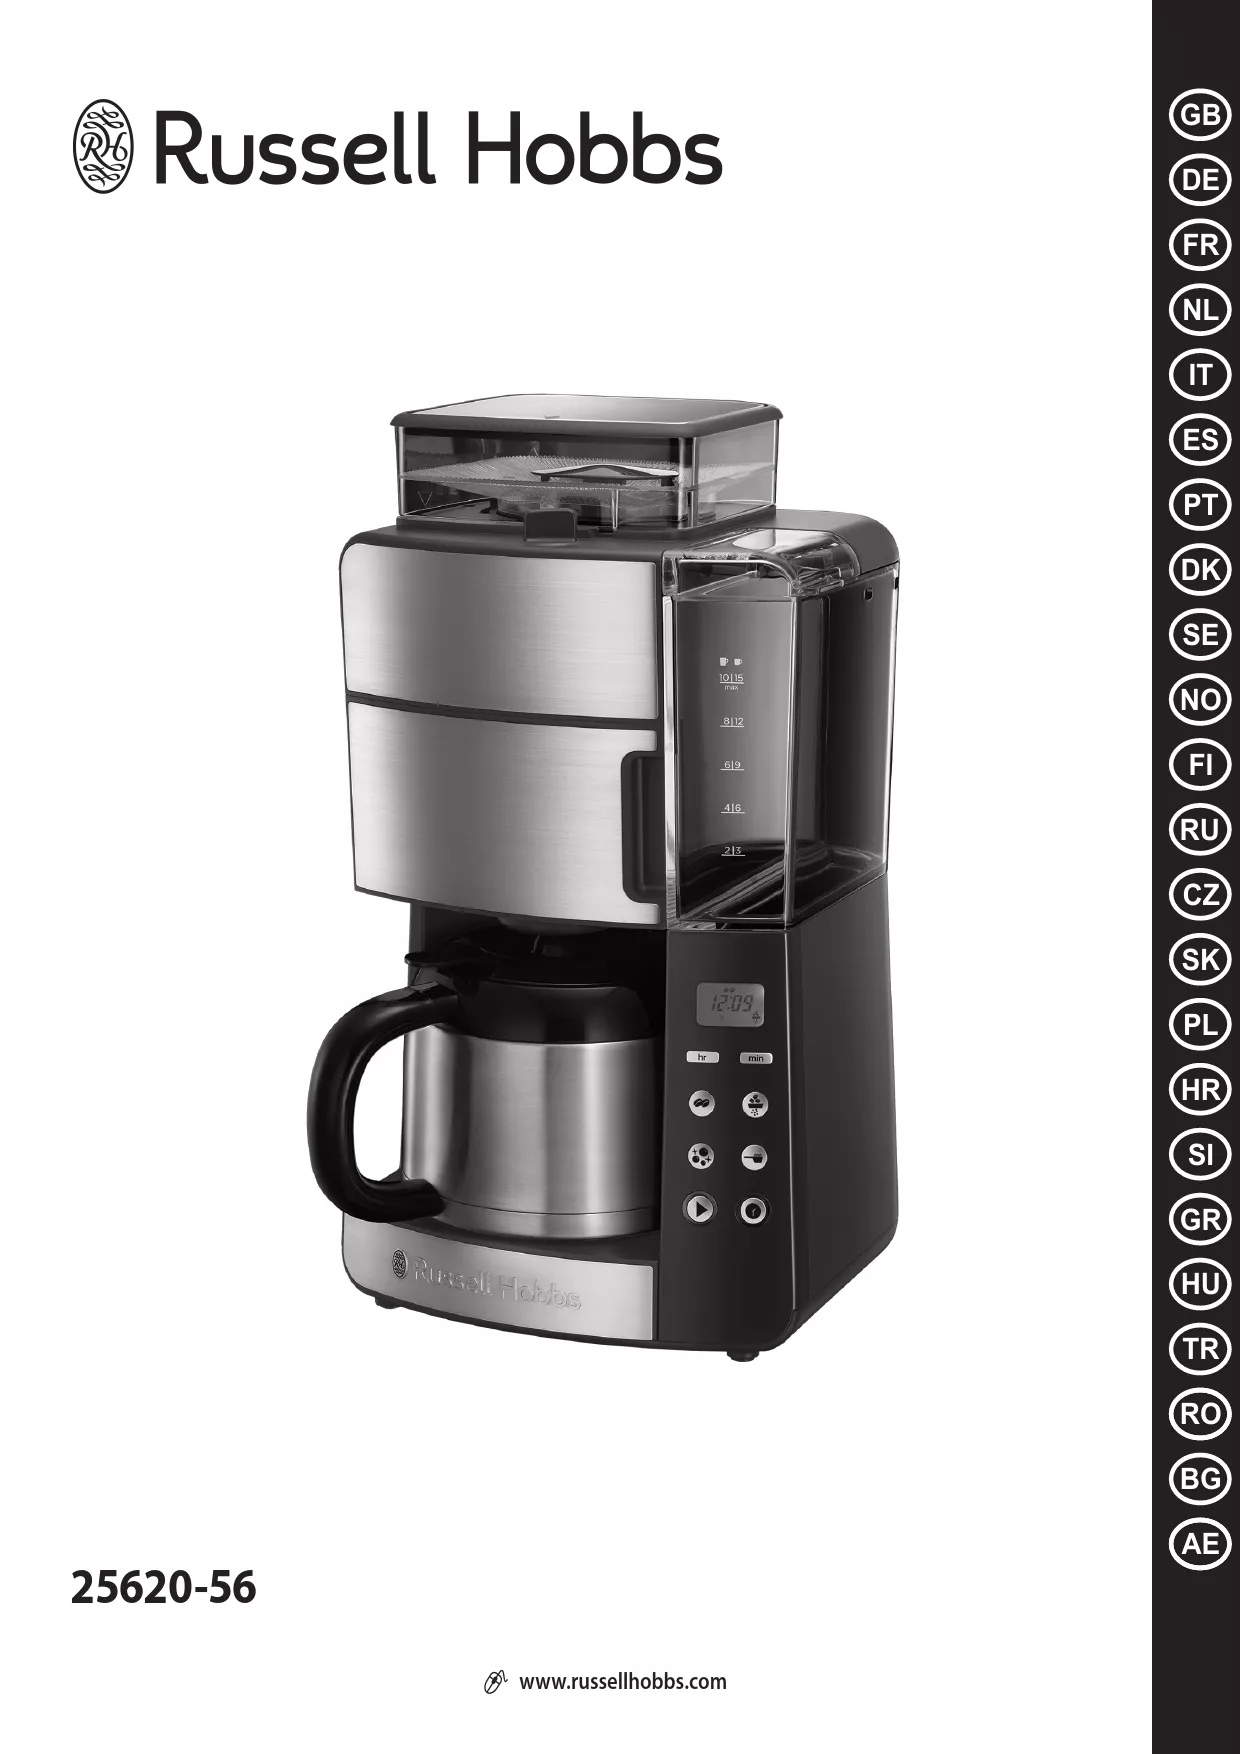 Mode d'emploi RUSSELL HOBBS GRIND AND BREW THERMAL CARAFE